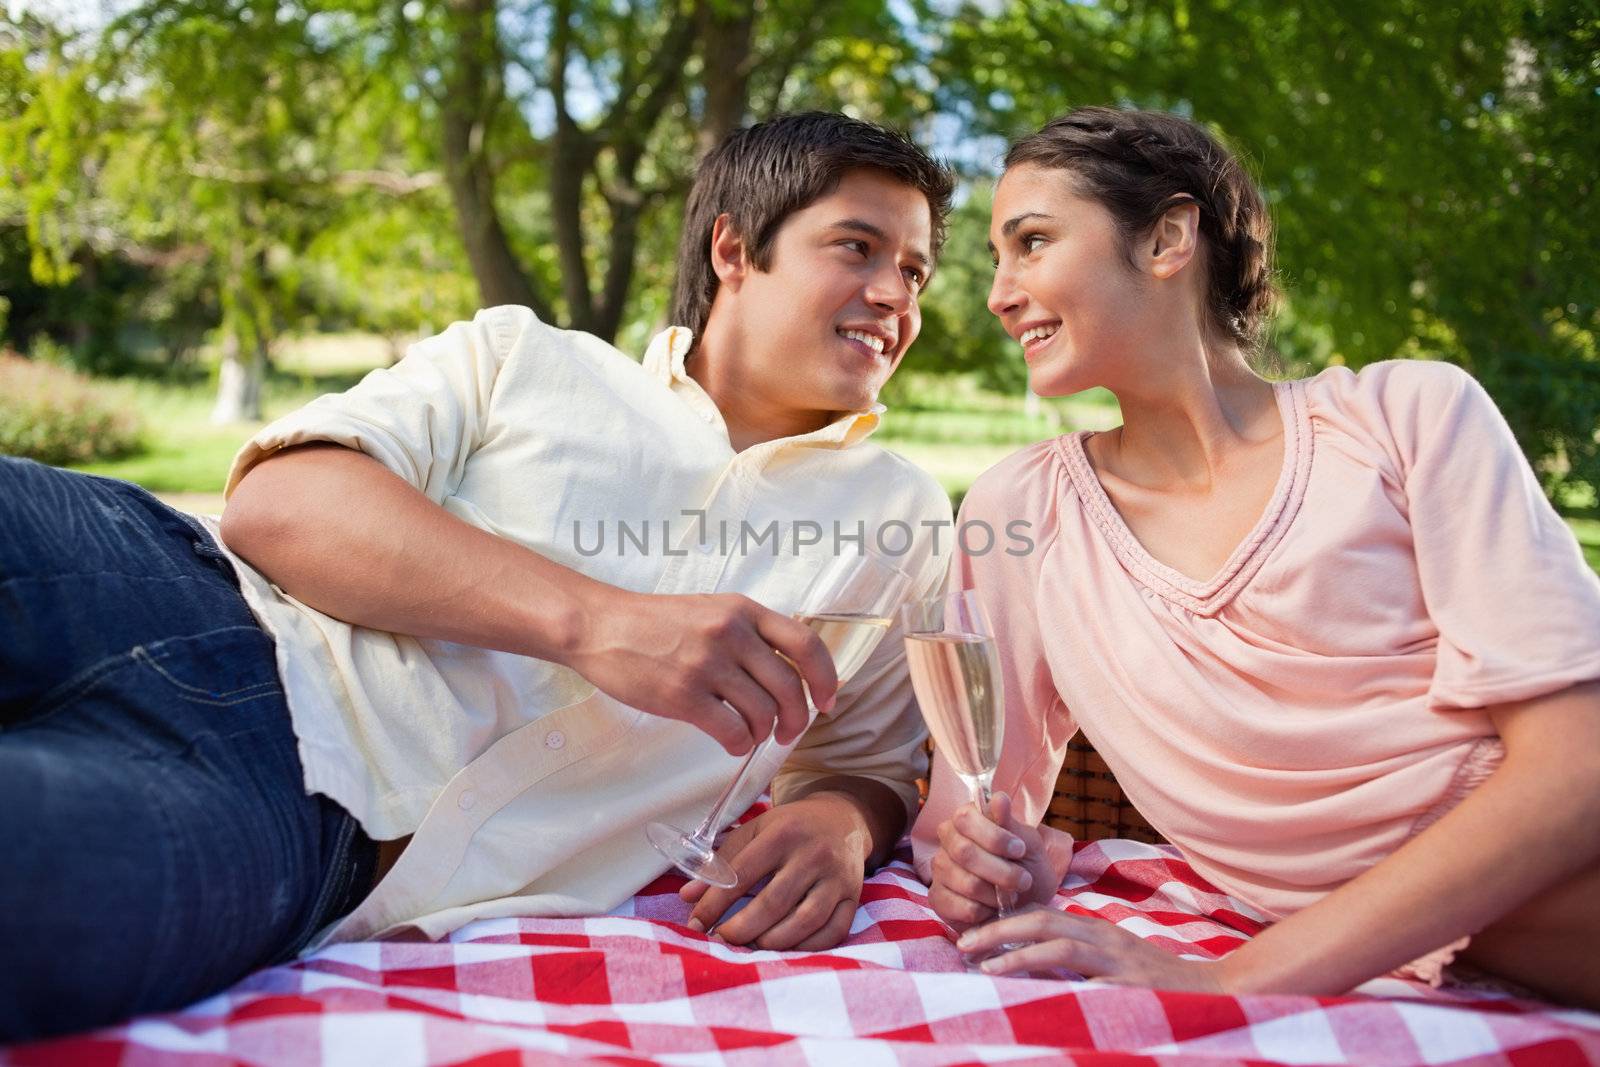 Two friends smiling as they look at each other while holding glasses of champagne during a picnic